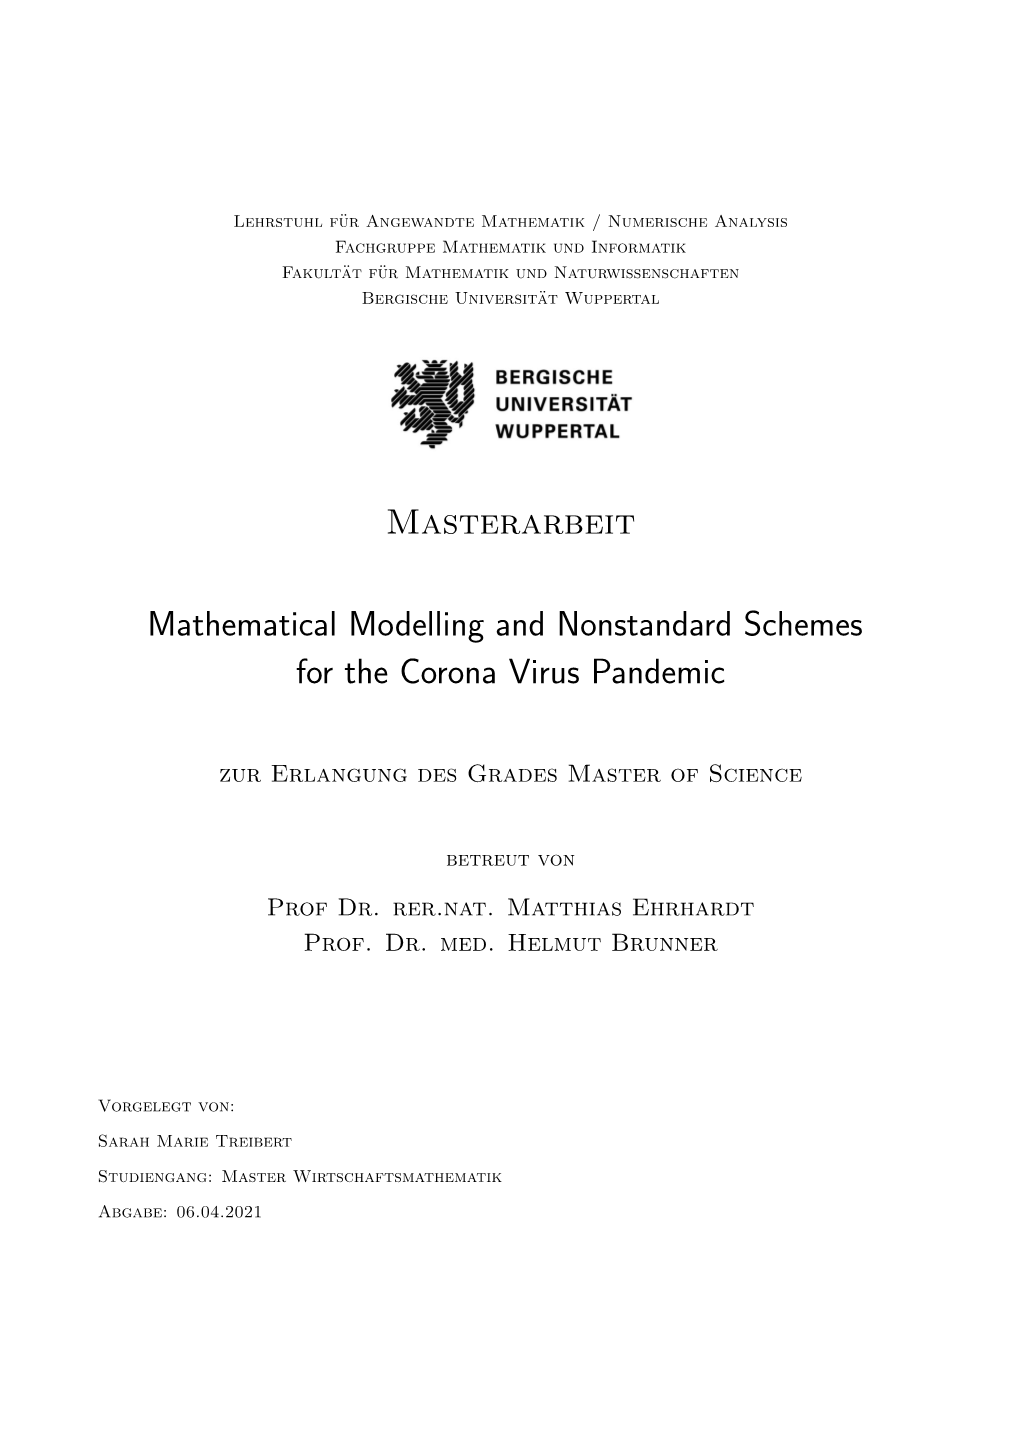 Masterarbeit Mathematical Modelling and Nonstandard Schemes for The